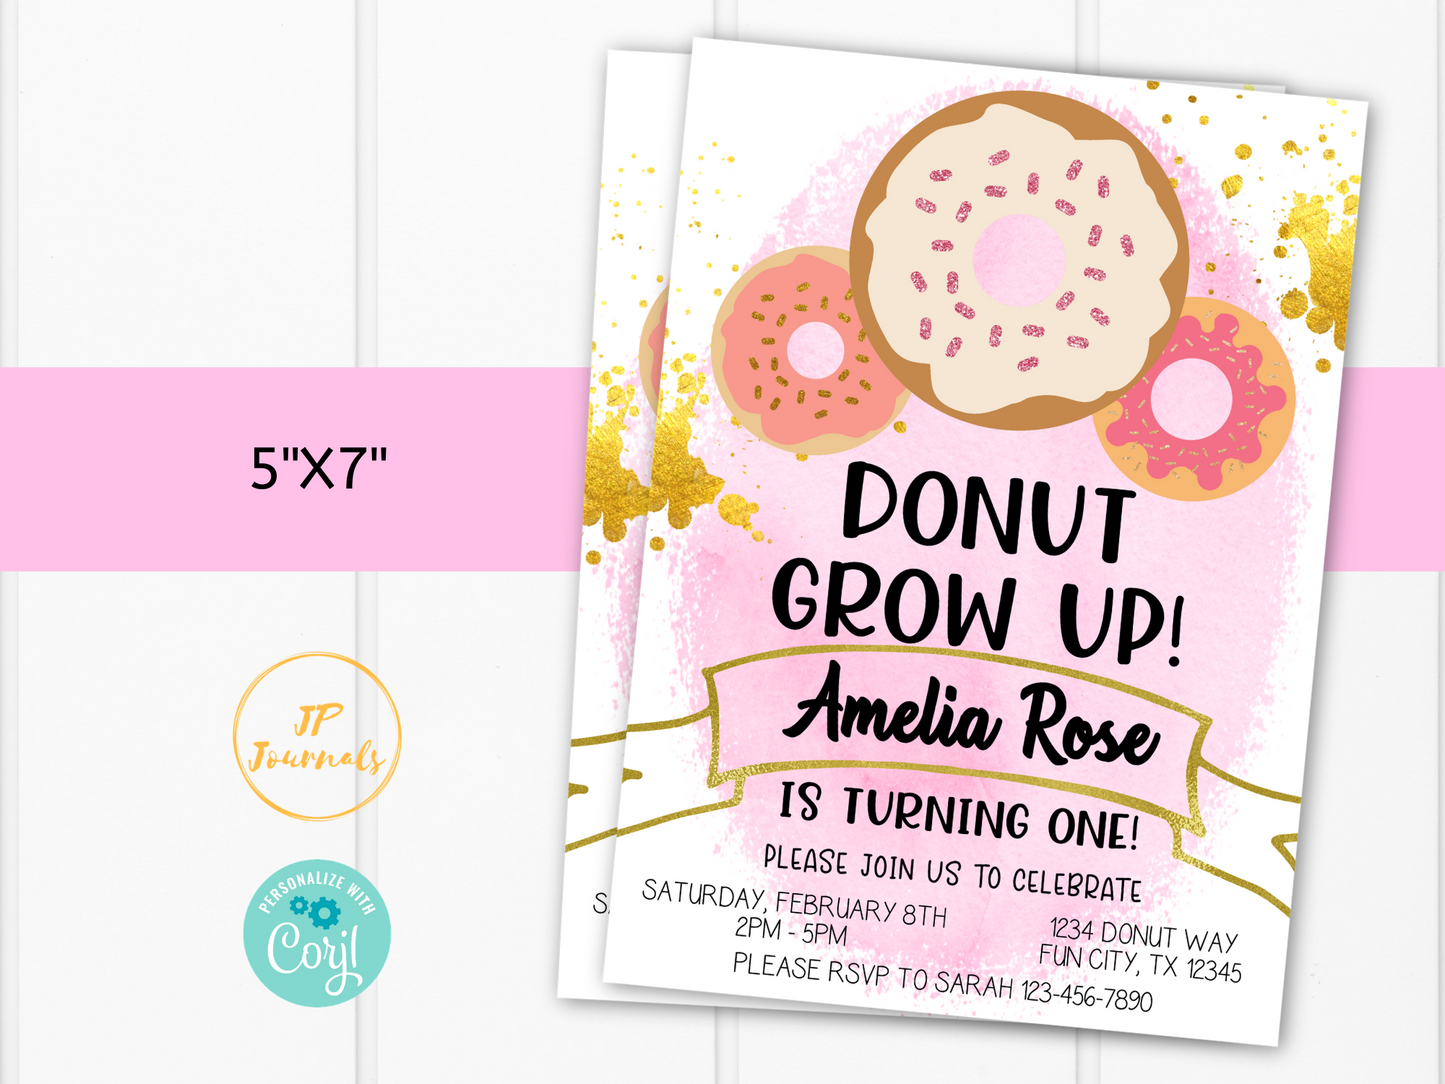 Editable Donut Birthday Party Invitation Template - Pink and Gold for Girls- Donut Grow Up - Edit & Print - Printable Invitation